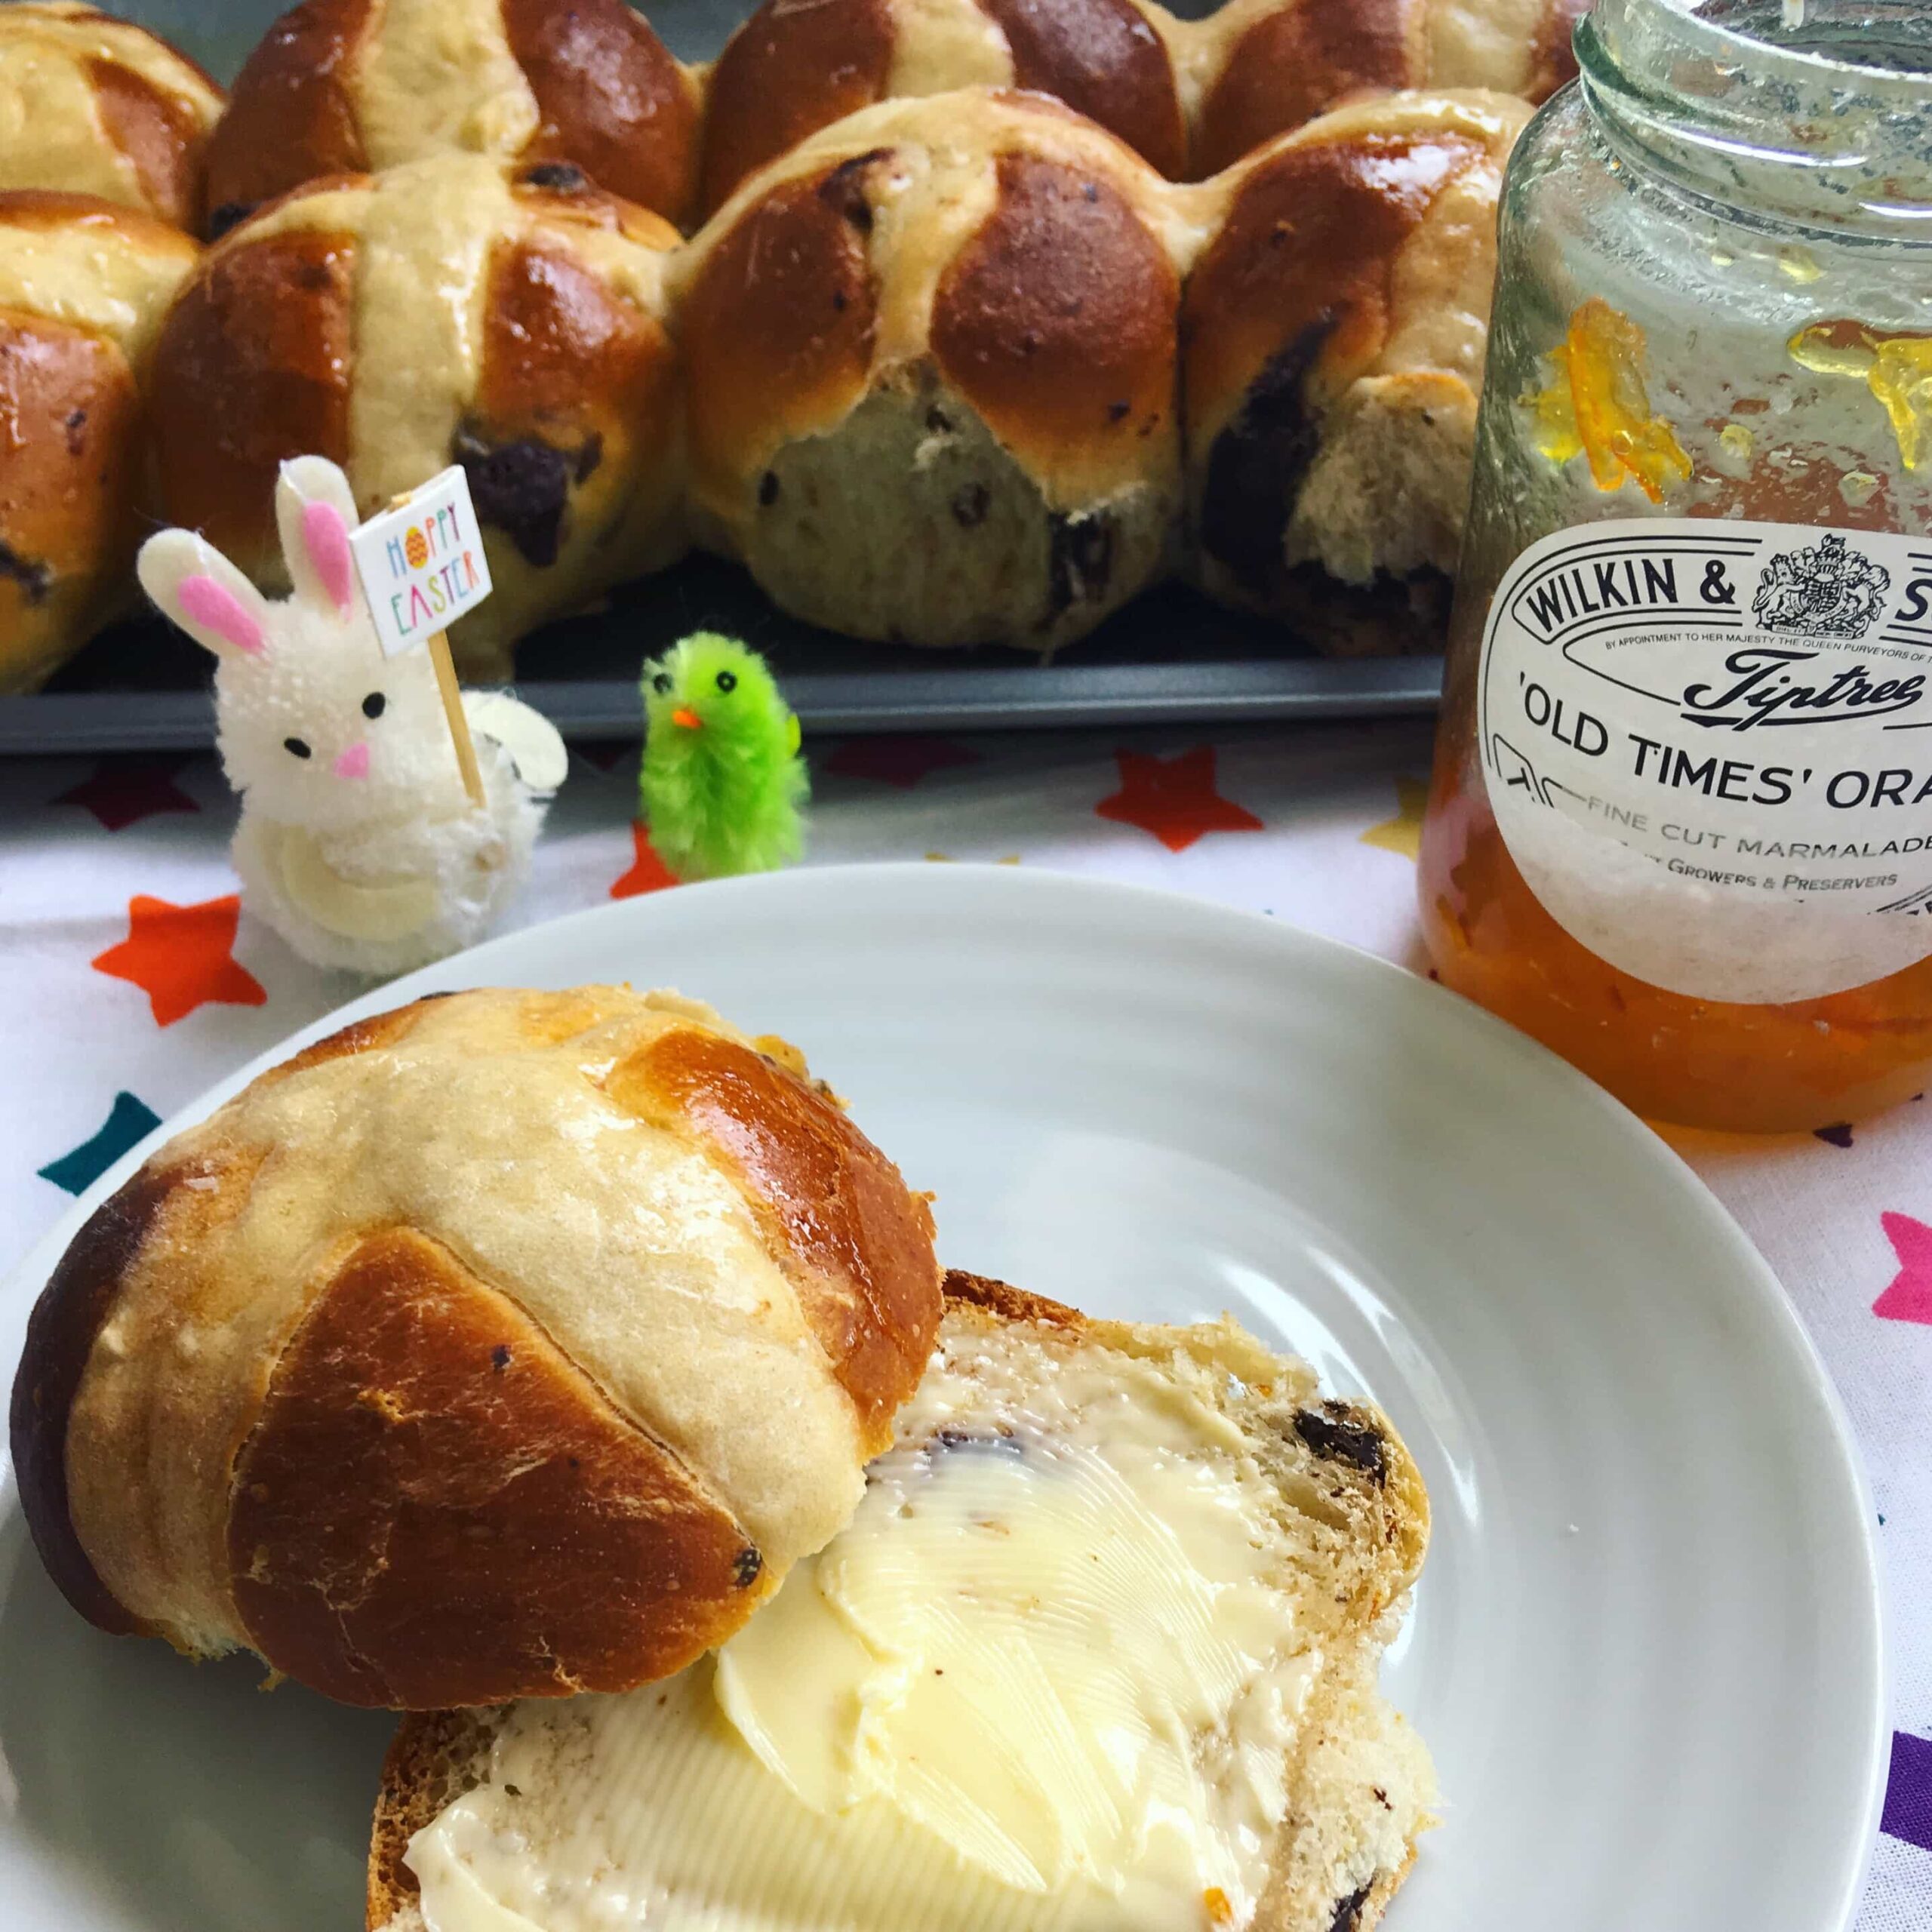 A chocolate chip hot cross bun split in half and spread with butter. A tray of hot cross buns can be seen in the background along with a jar of marmalade and a little Easter bunny and chick.